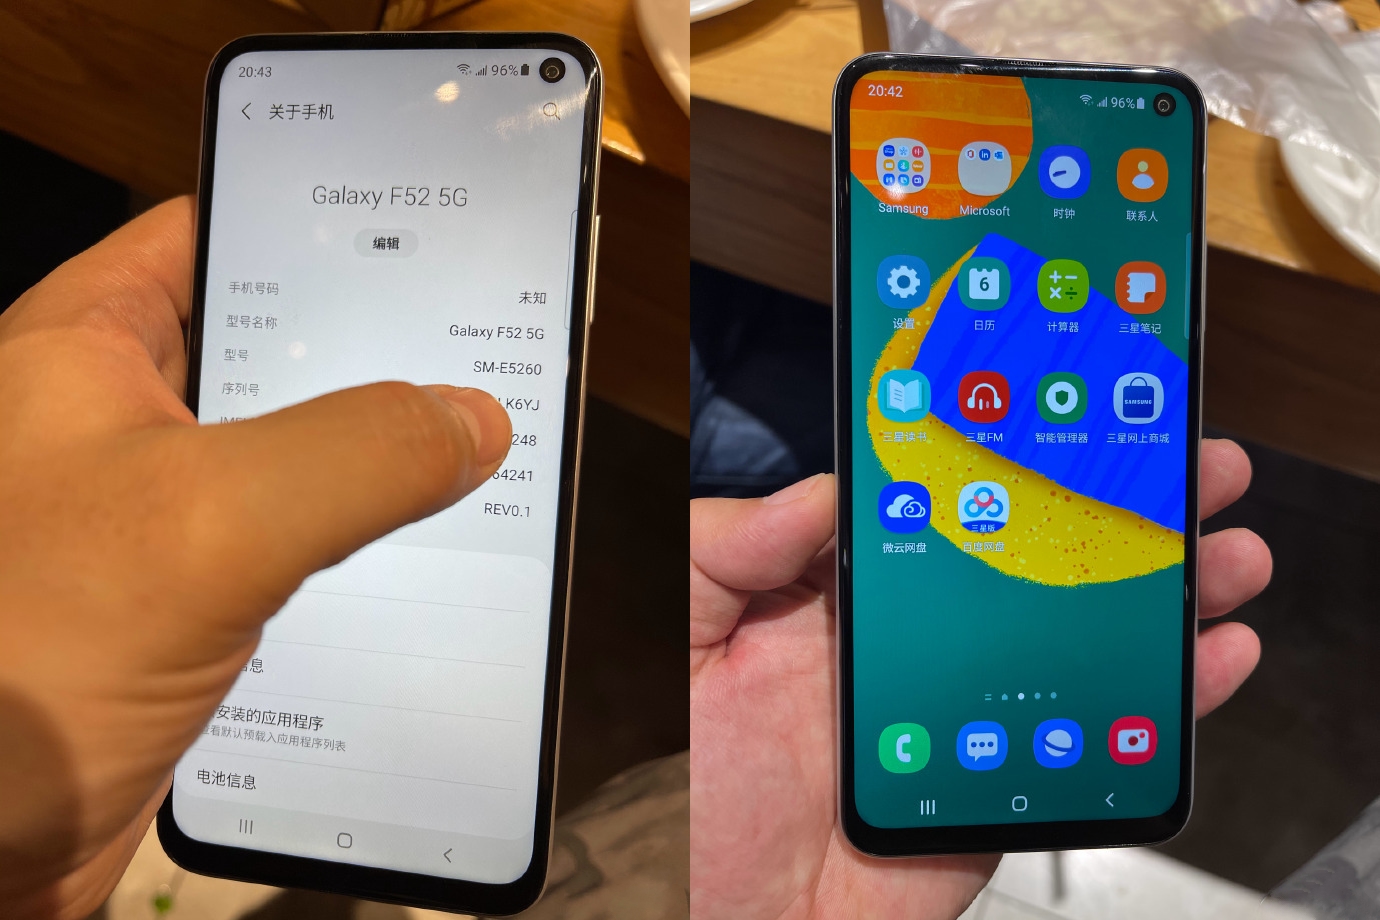 Images of Galaxy F52 5G leaked to the network: with punch-hole camera design and characteristics like Galaxy A52 5G